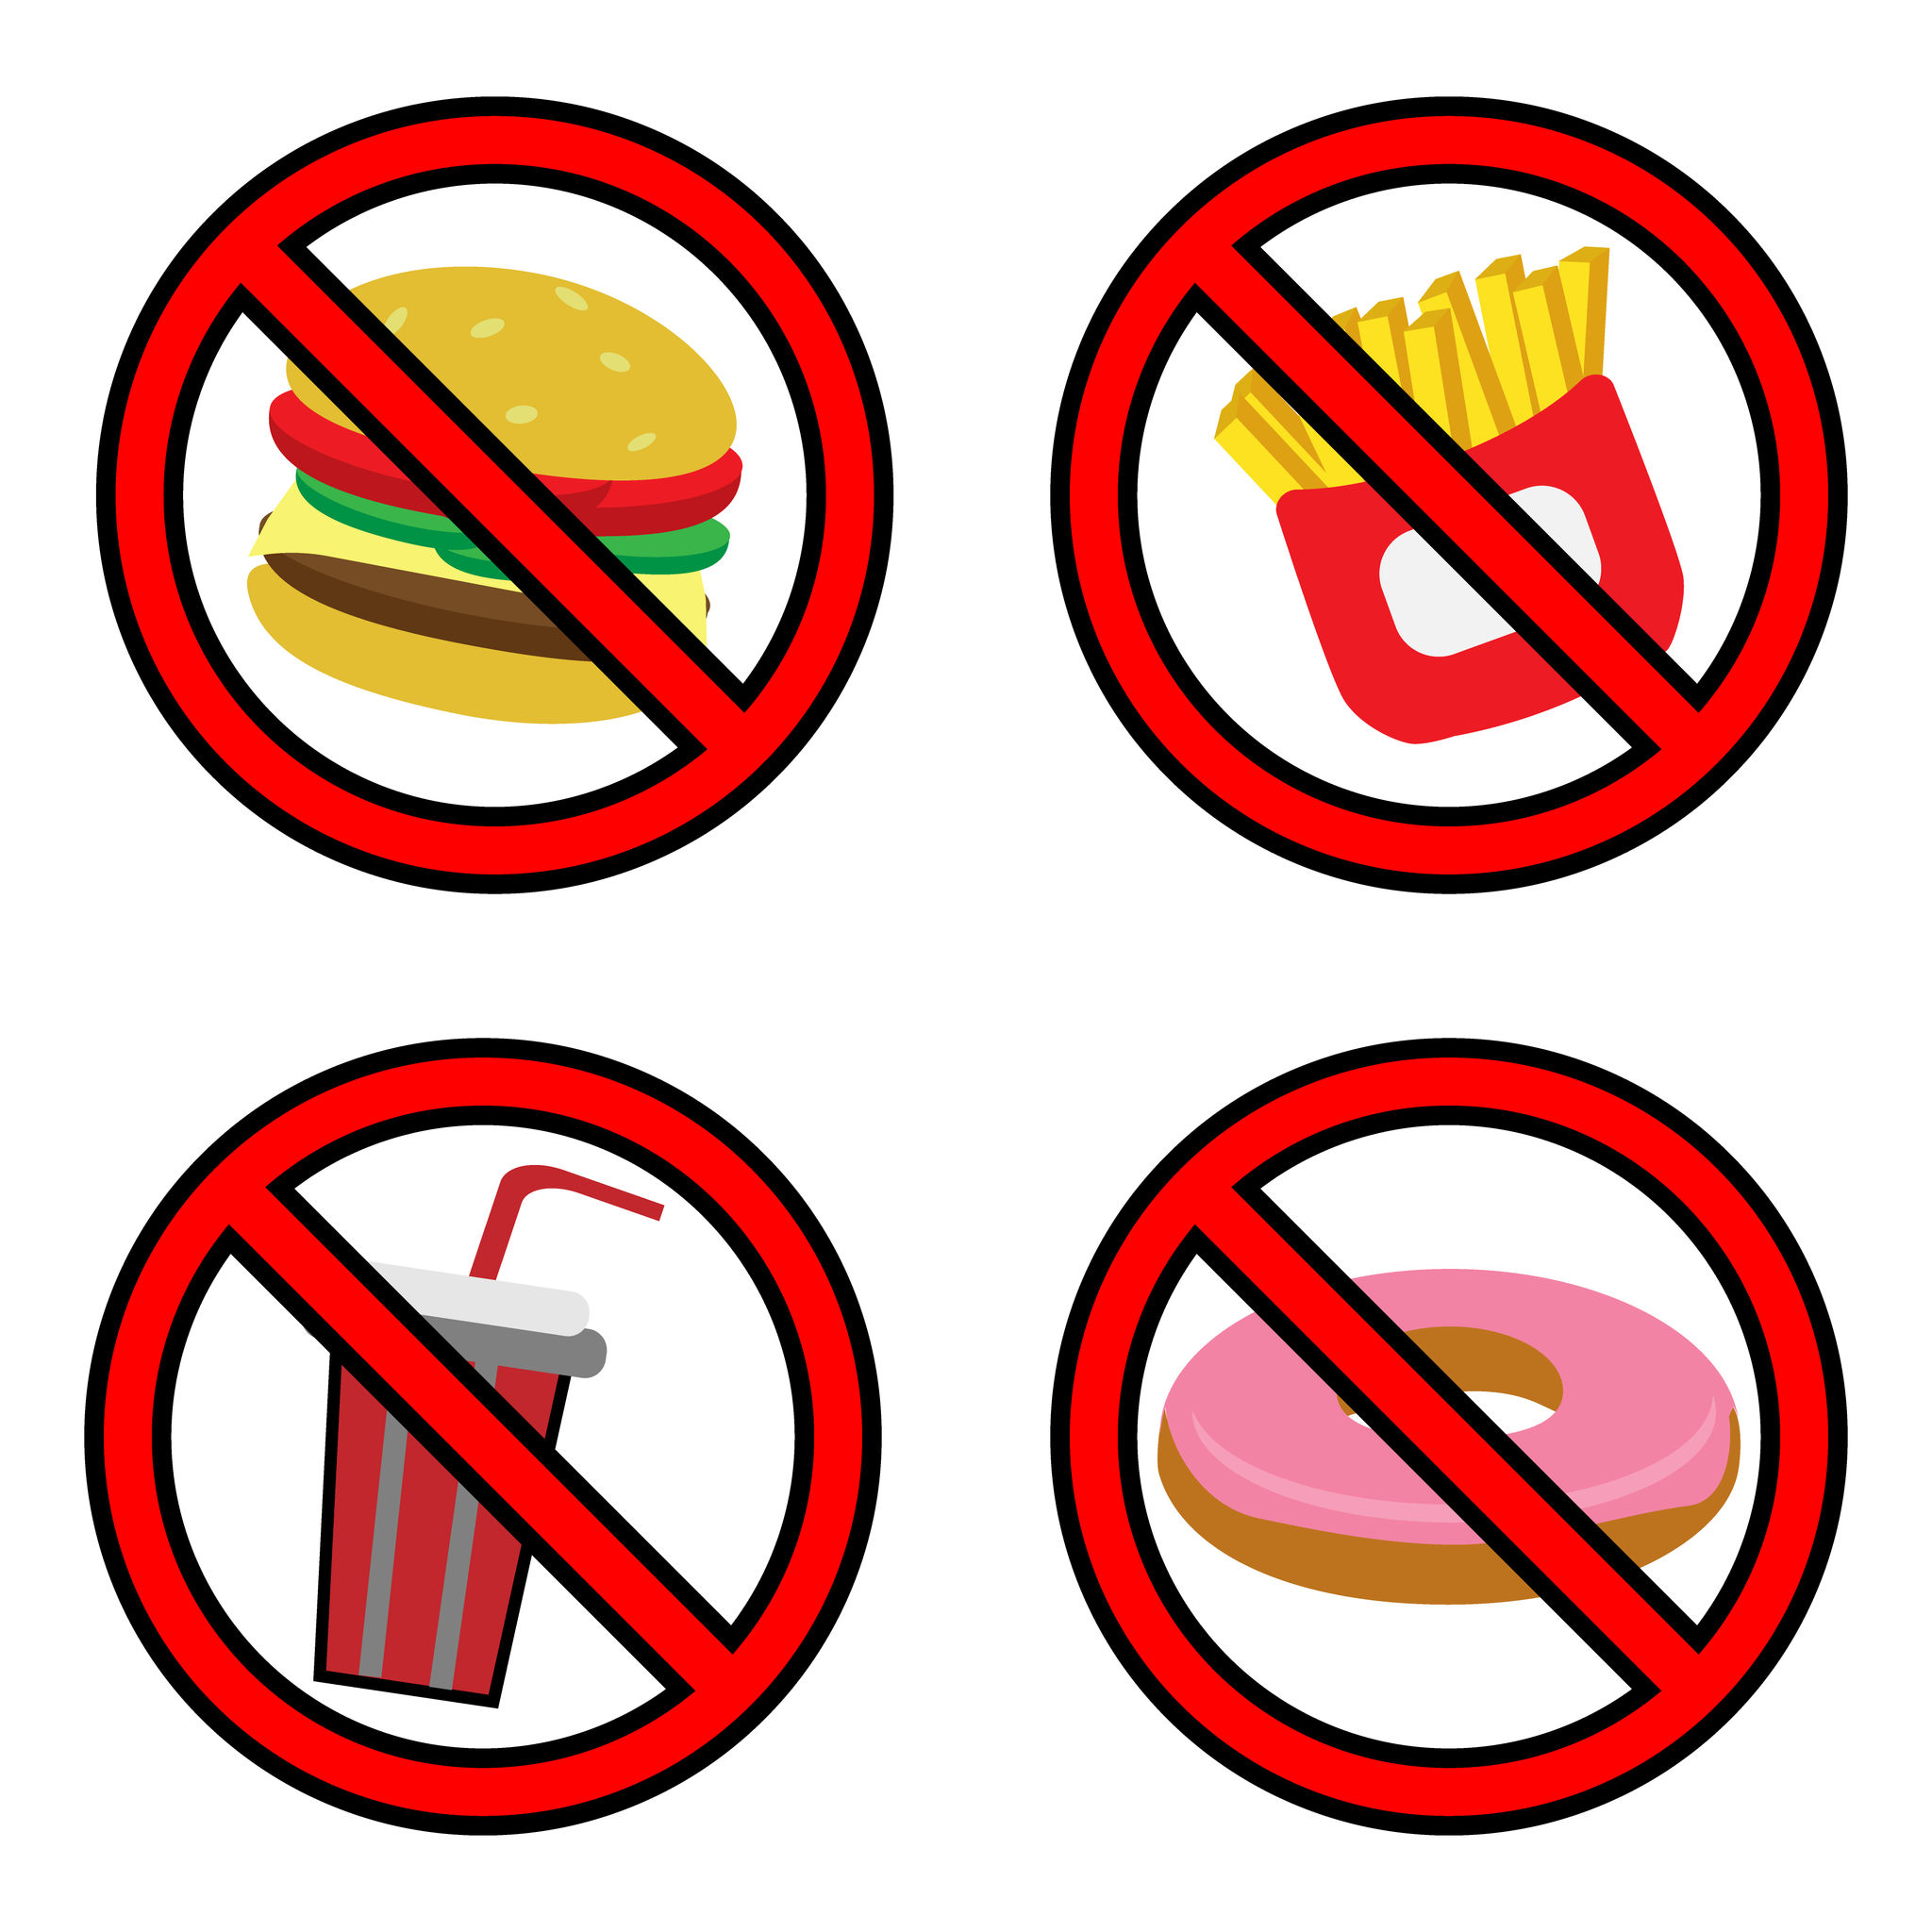 70441431 - fastfood prohibition sign